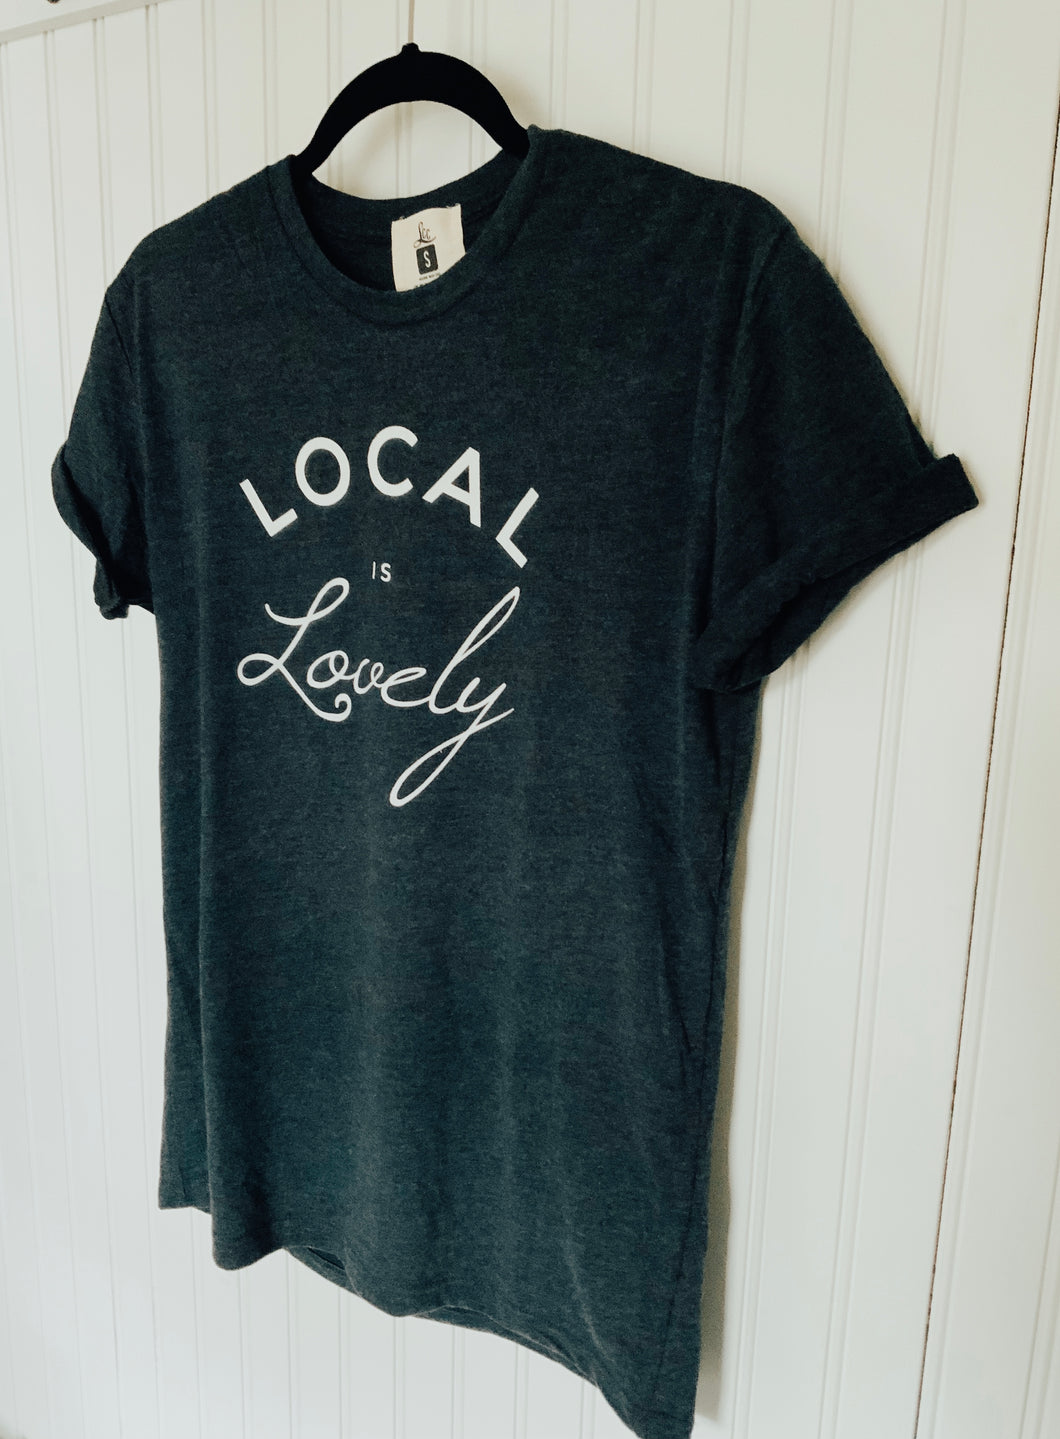 *RESTOCKED!* Local is Lovely Tee